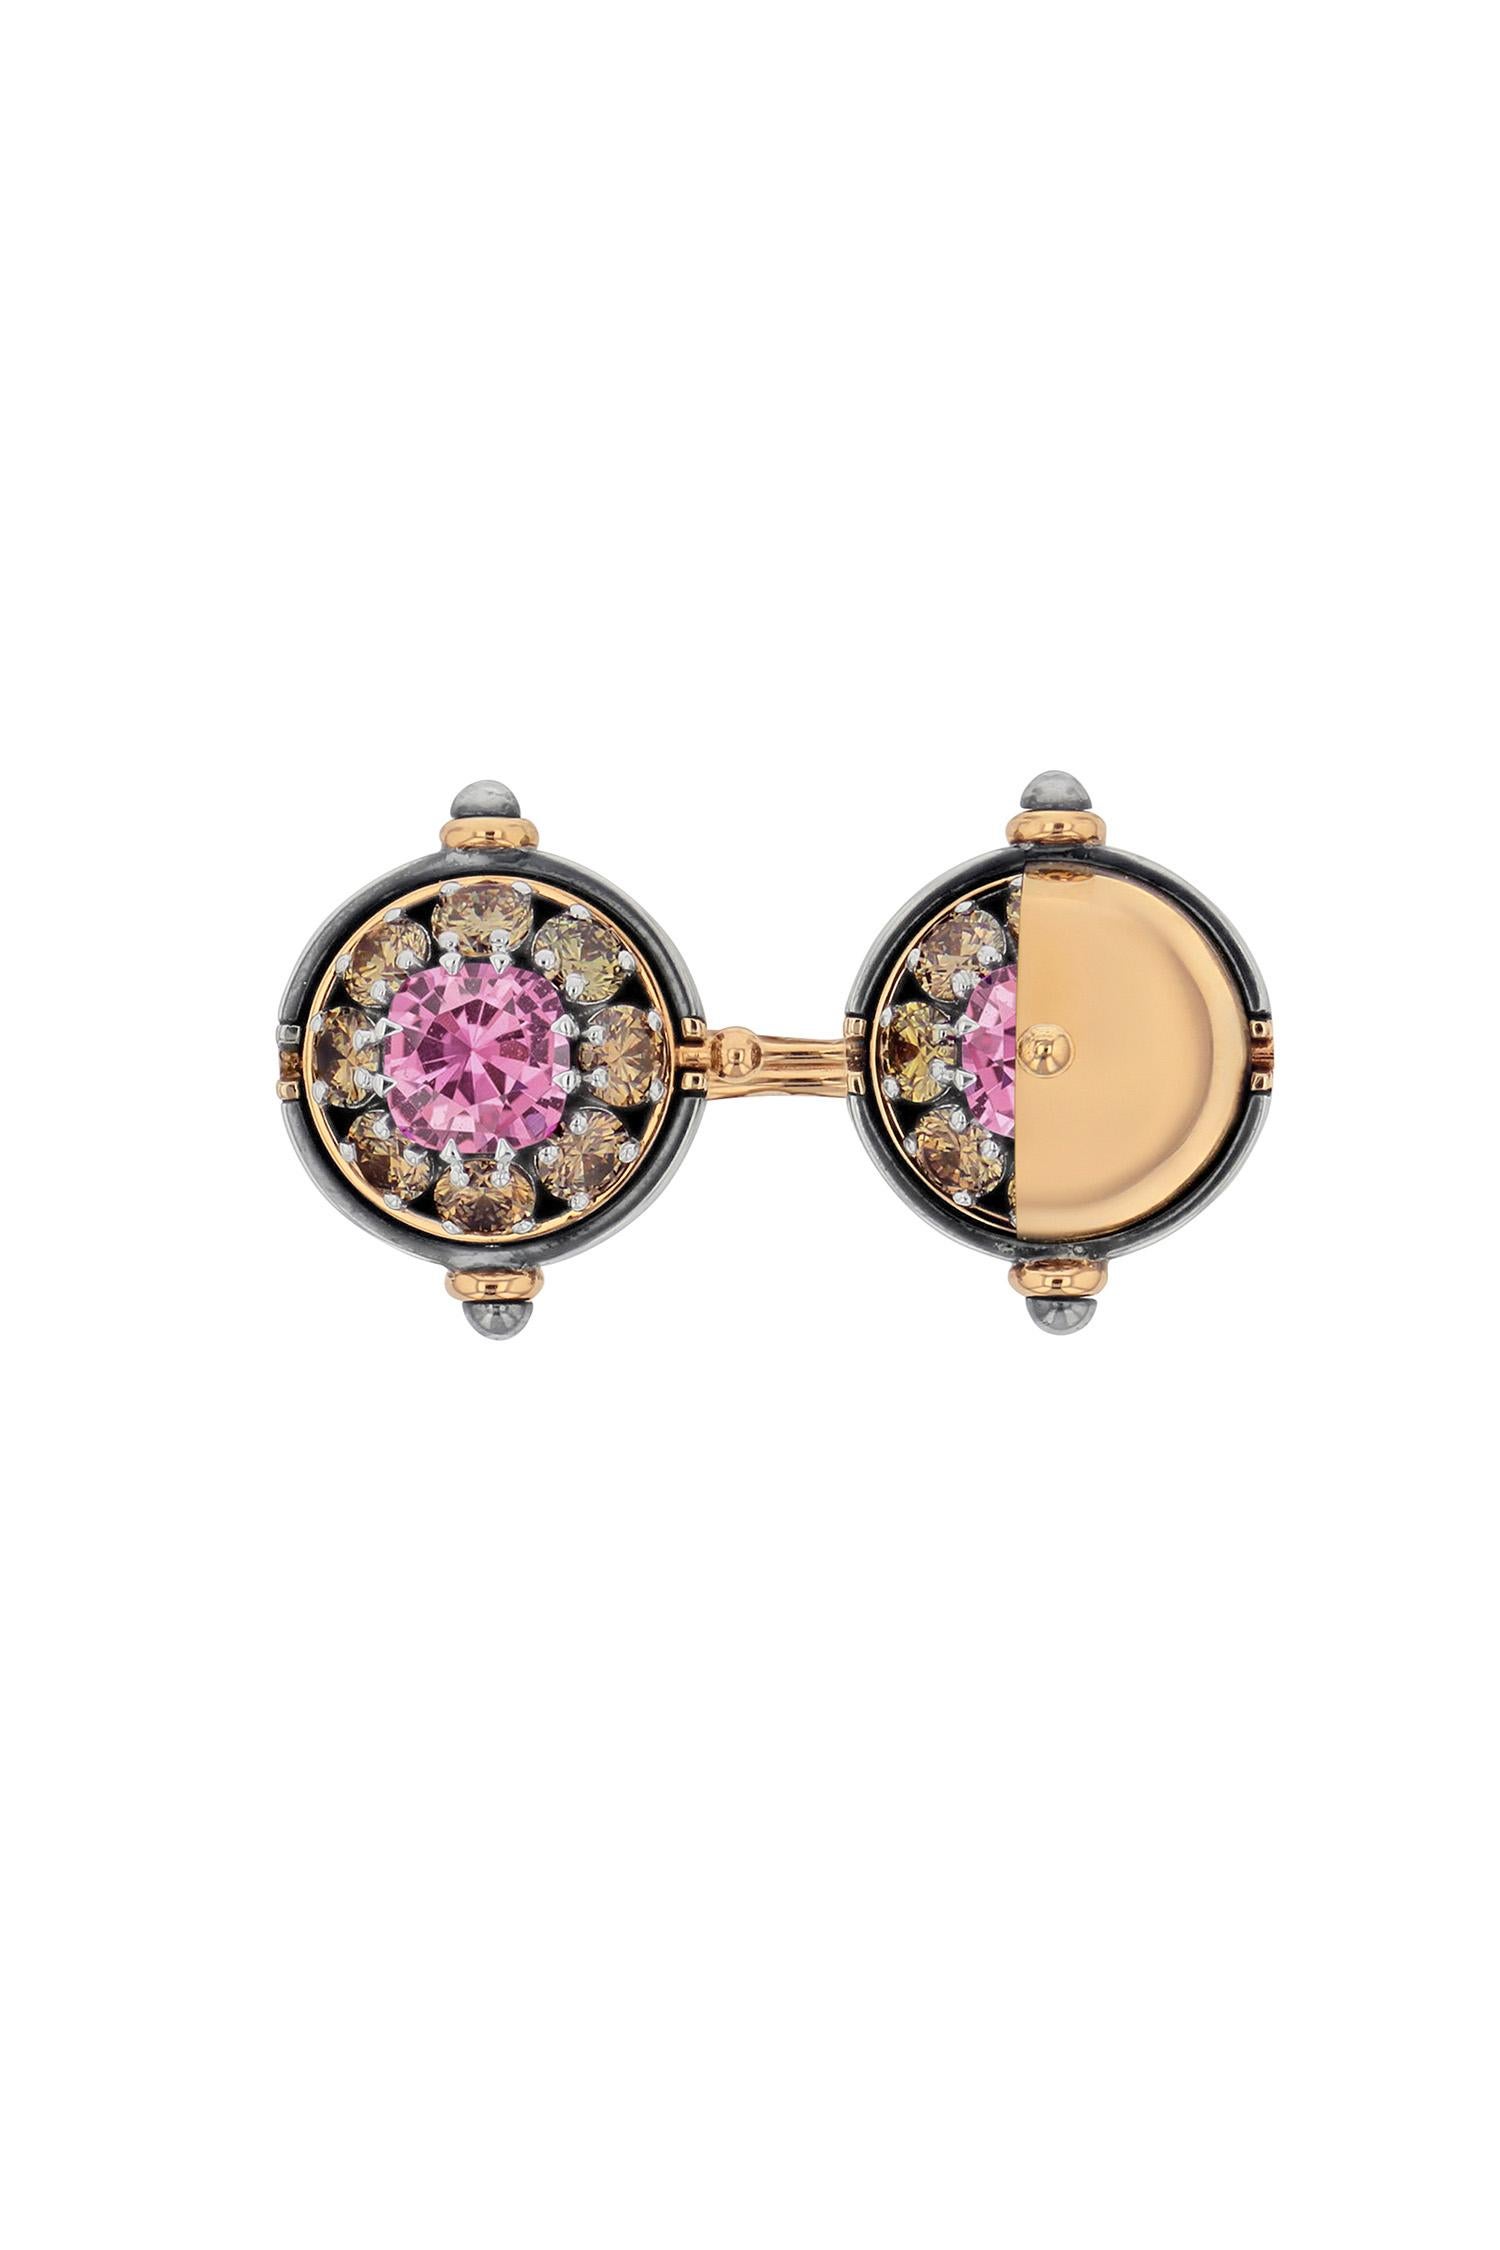 Pink Sapphire & Diamonds Sirius Toi&Moi Ring in 18k Rose Gold by Elie Top In New Condition For Sale In Paris, France